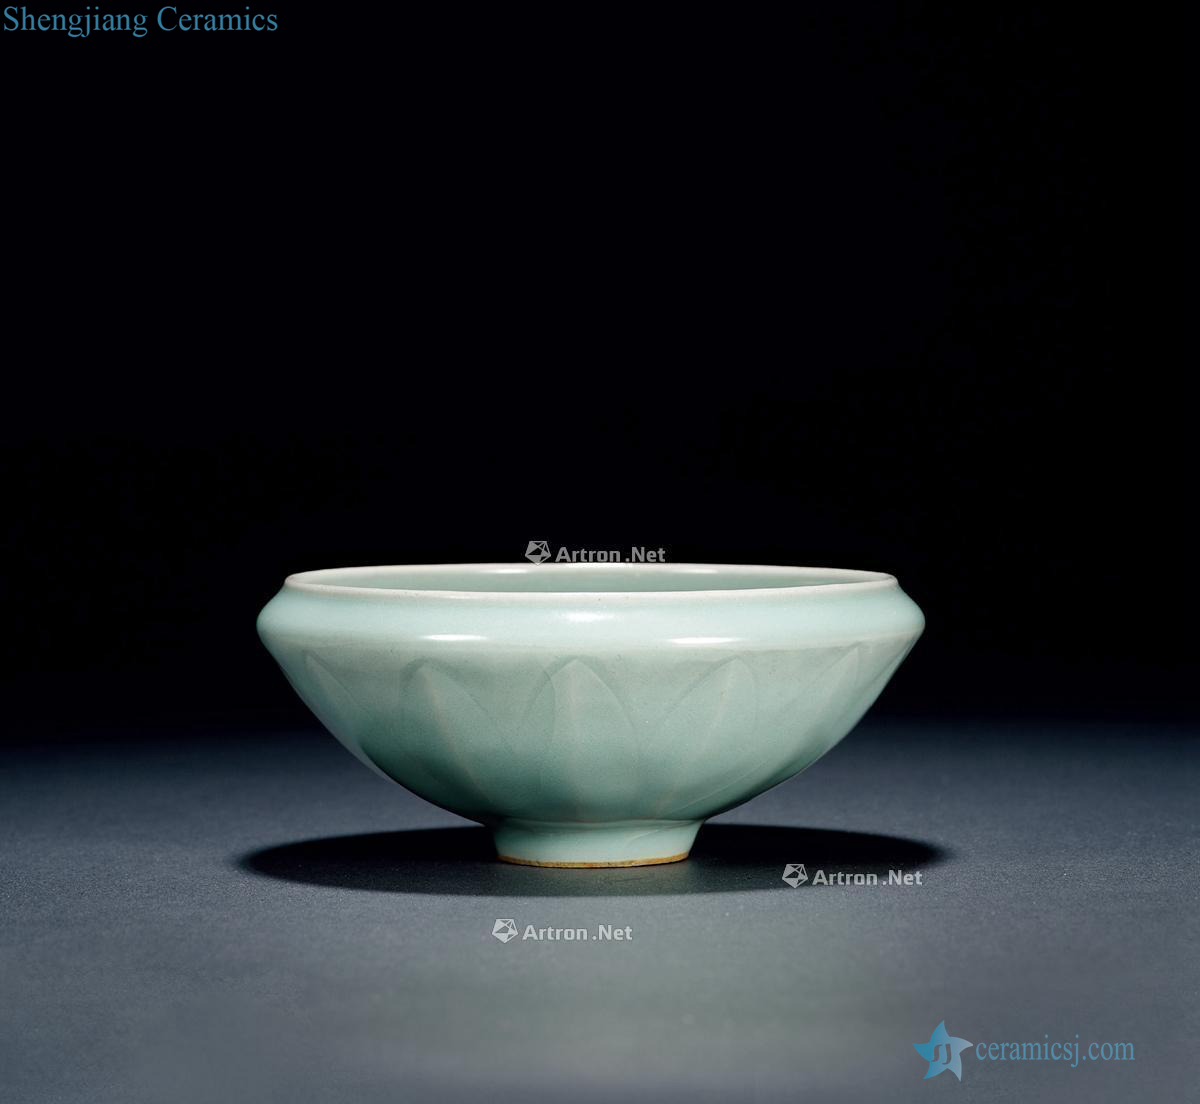 The southern song dynasty, longquan celadon lotus-shaped bowl